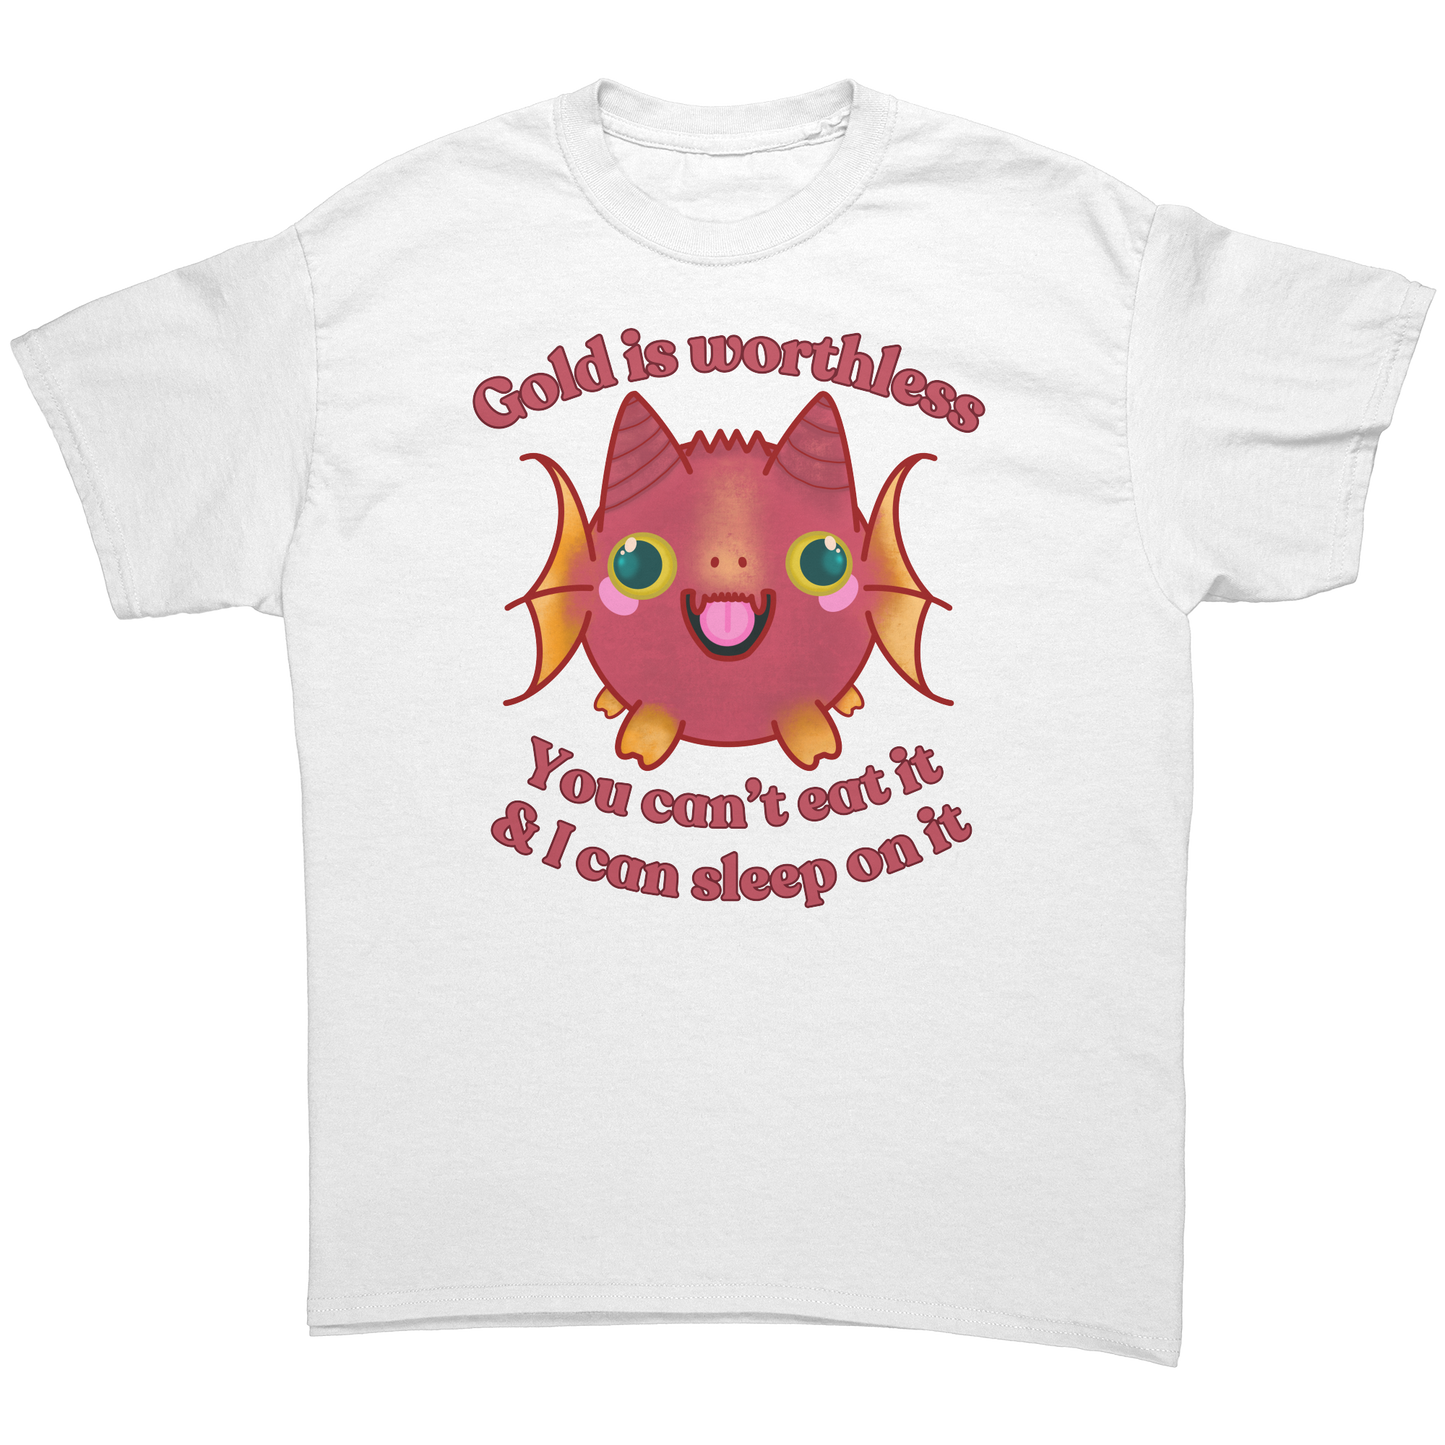 Gold is Worthless Adult T-Shirt